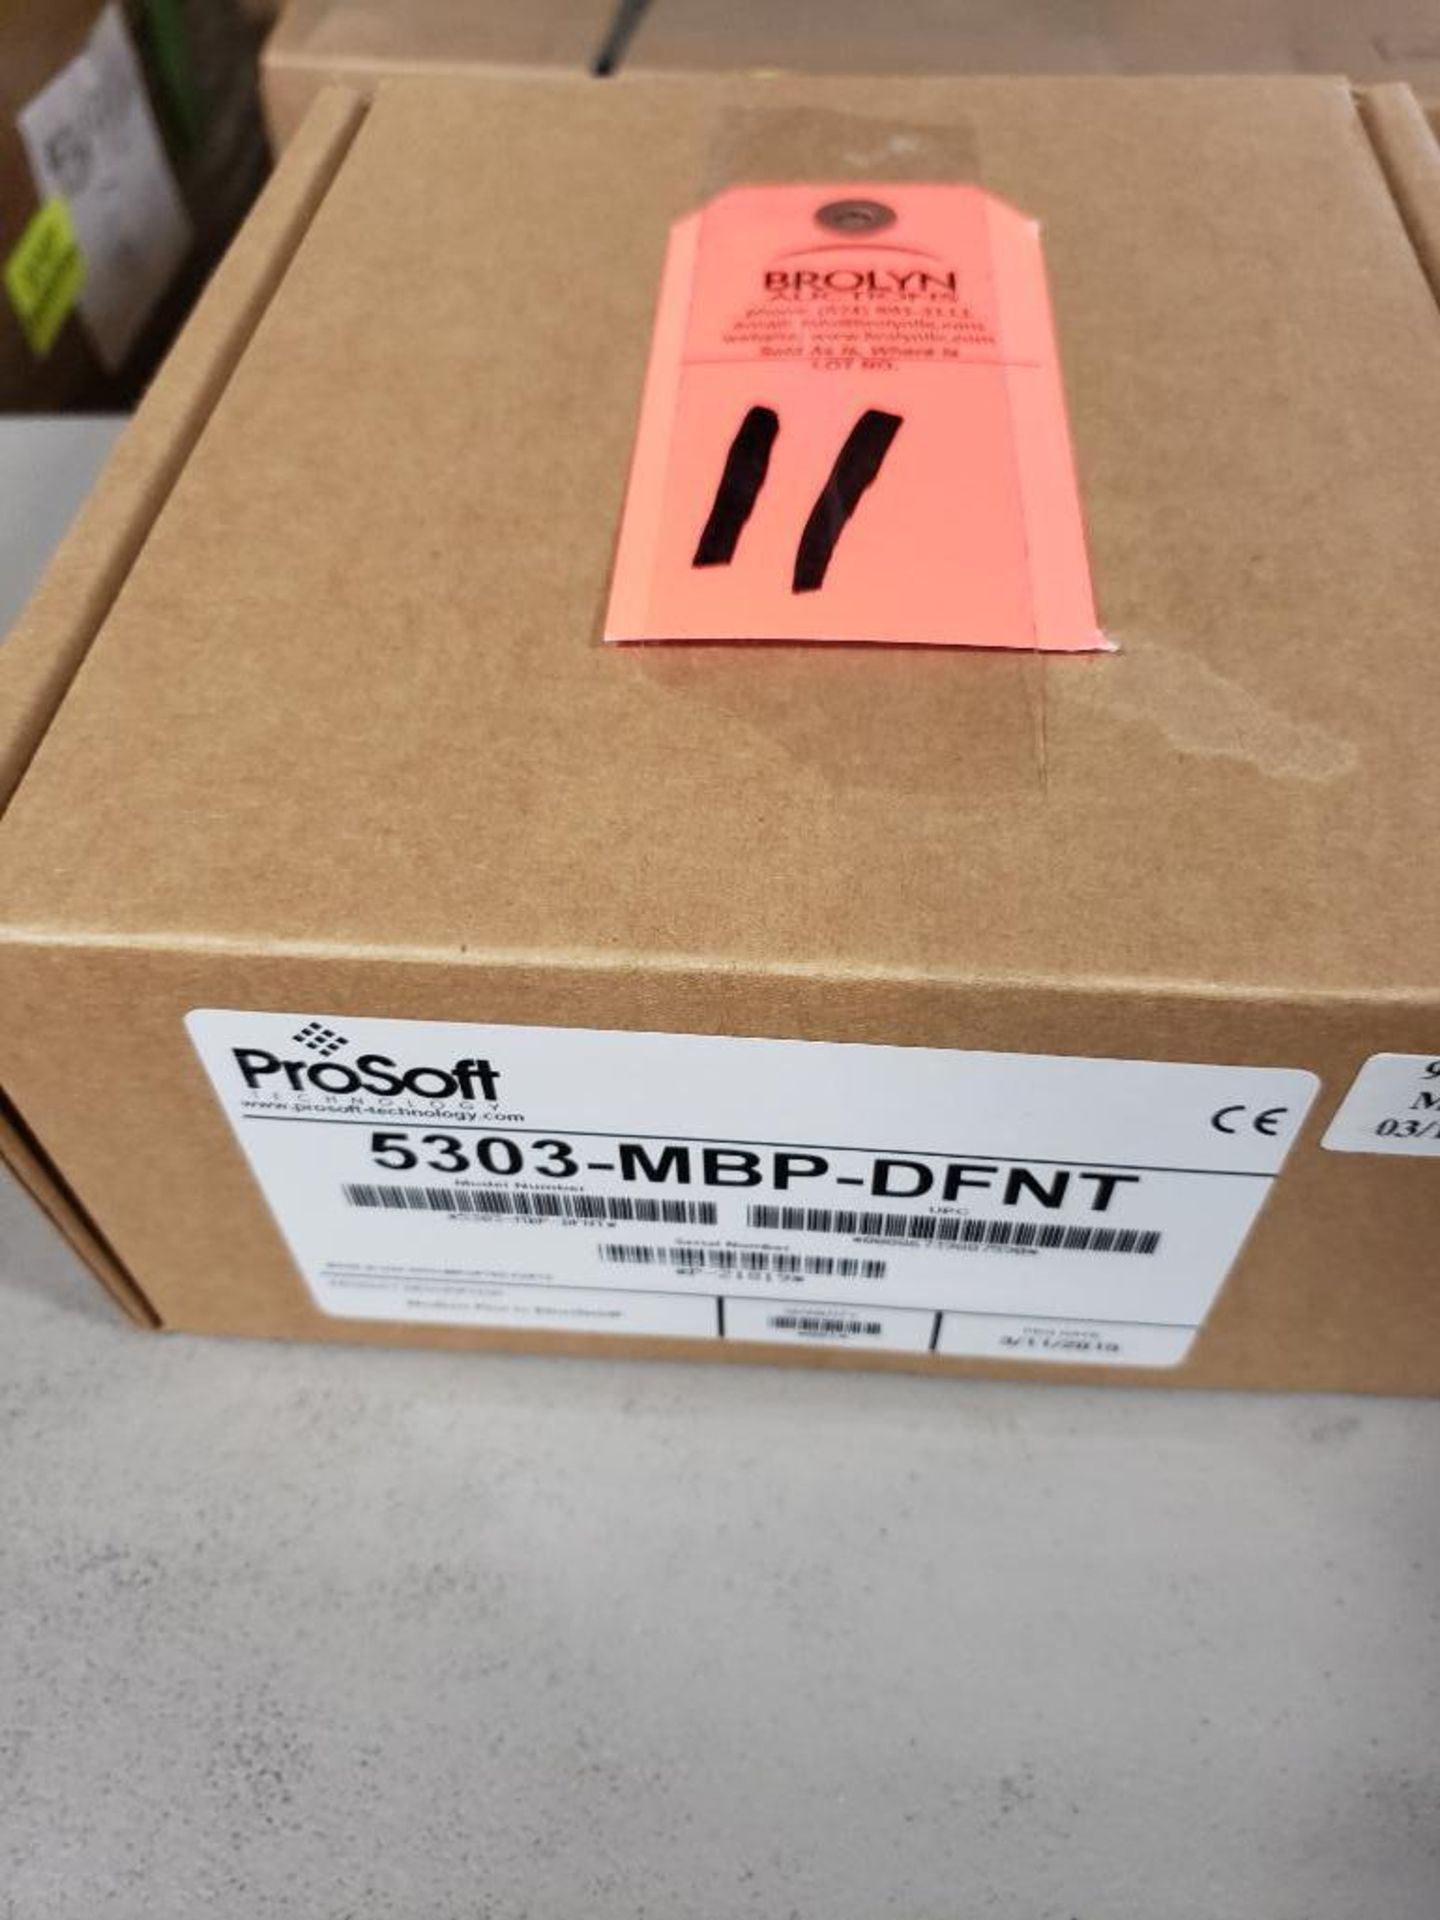 ProSoft Model 5303-MBP-DFNT, new in box as pictured.